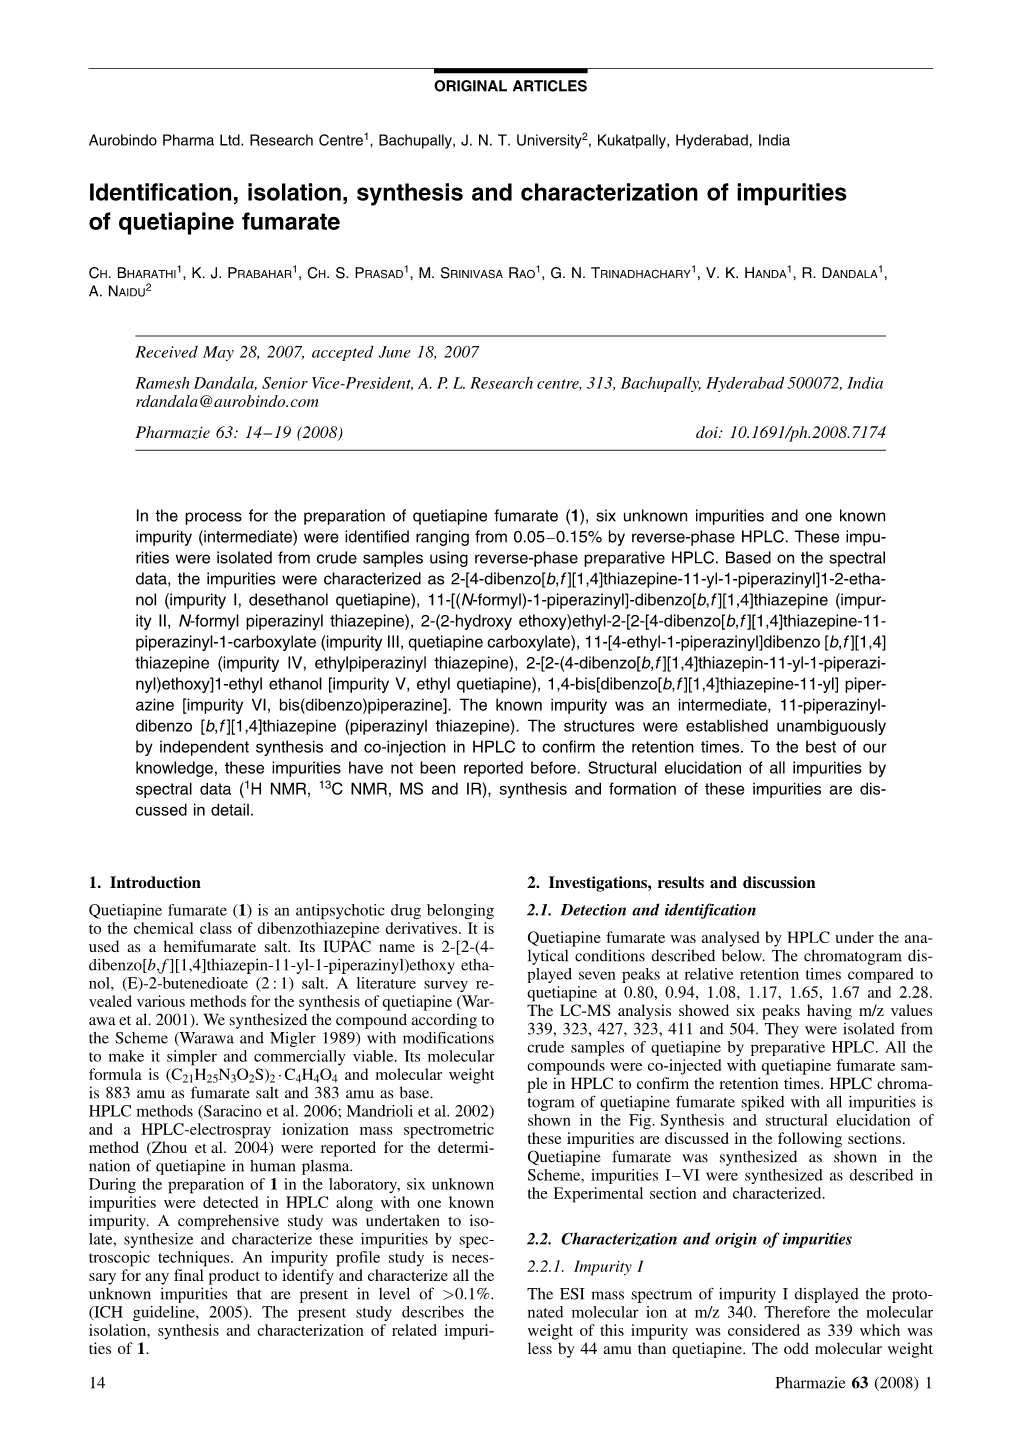 Identification, Isolation, Synthesis and Characterization of Impurities of Quetiapine Fumarate